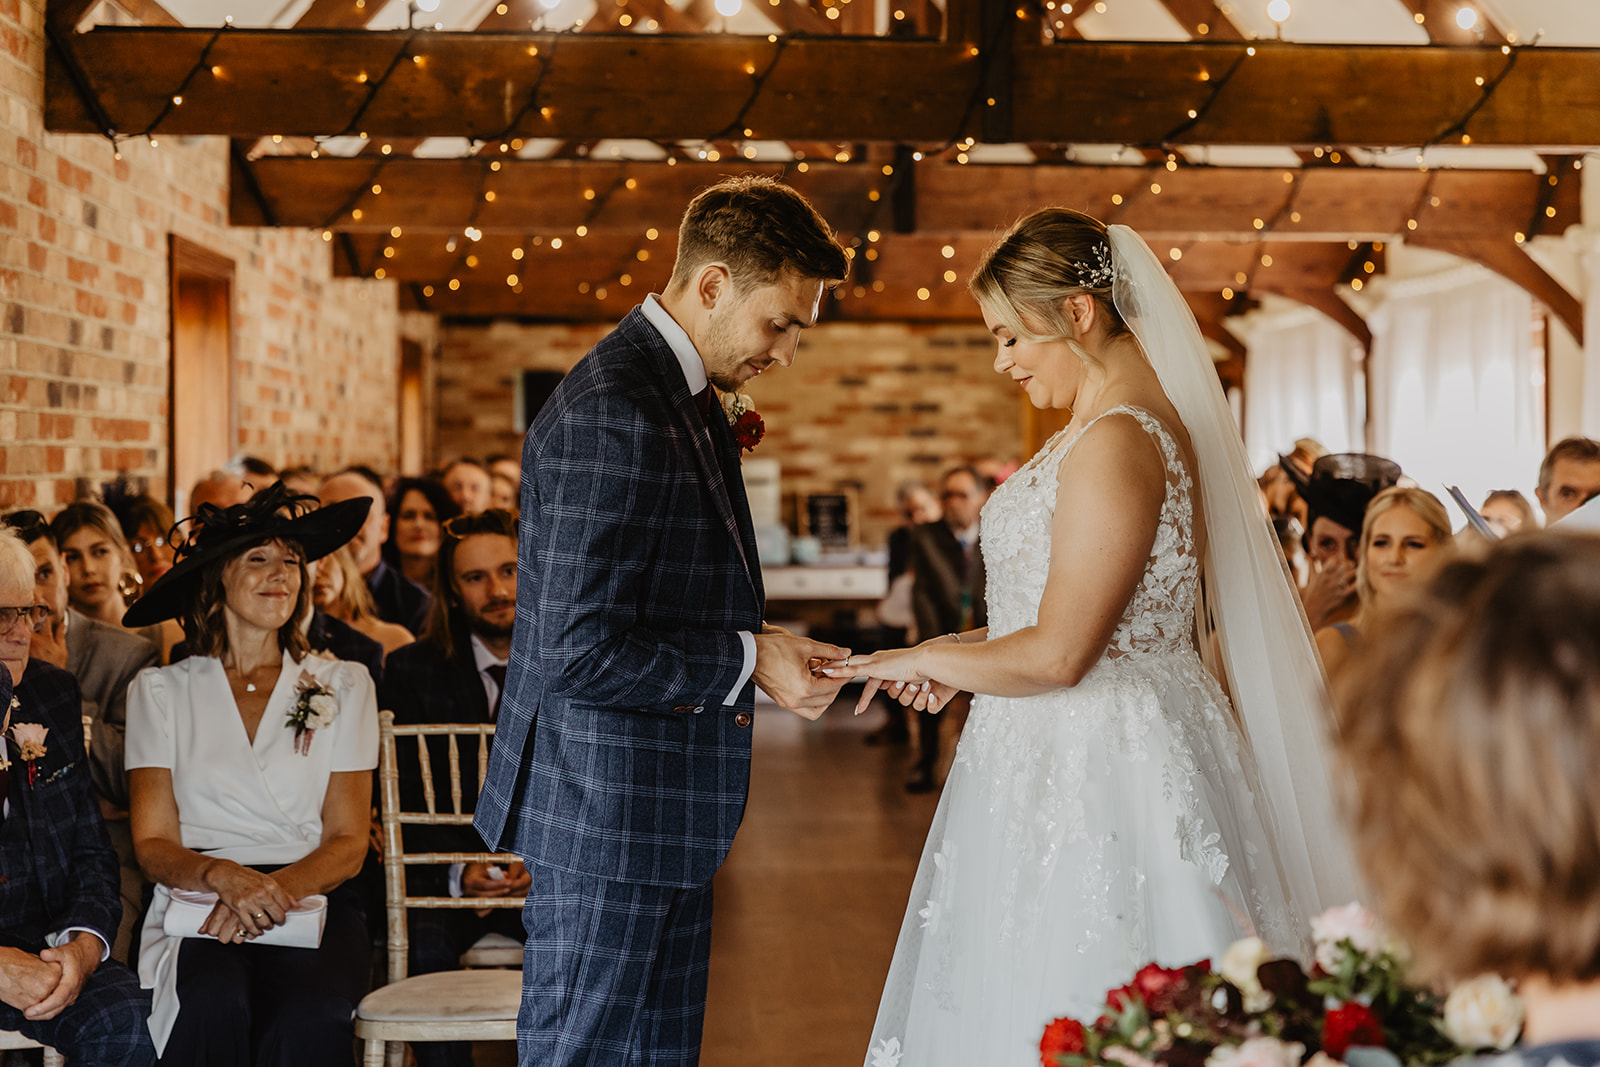 Bride and groom exchange rings at a wedding at Long Furlong Barn, Sussex. By OliveJoy Photography.